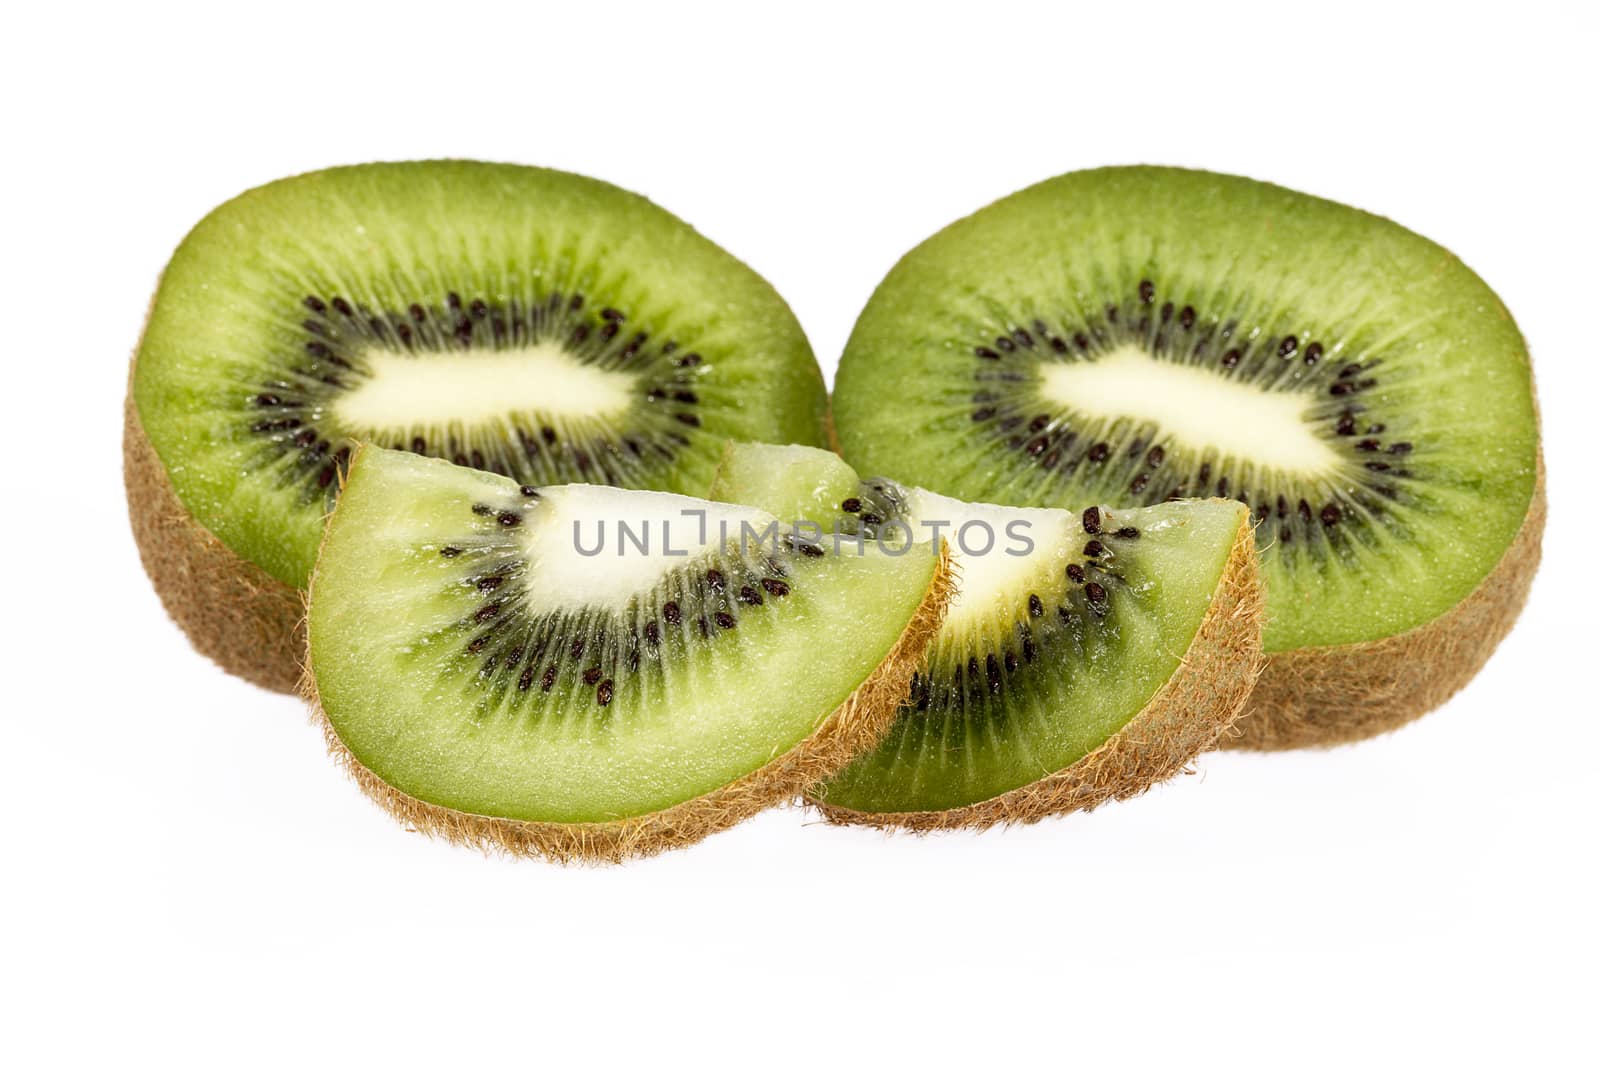 Pieces of green kiwi isolated on white background, close up by mychadre77